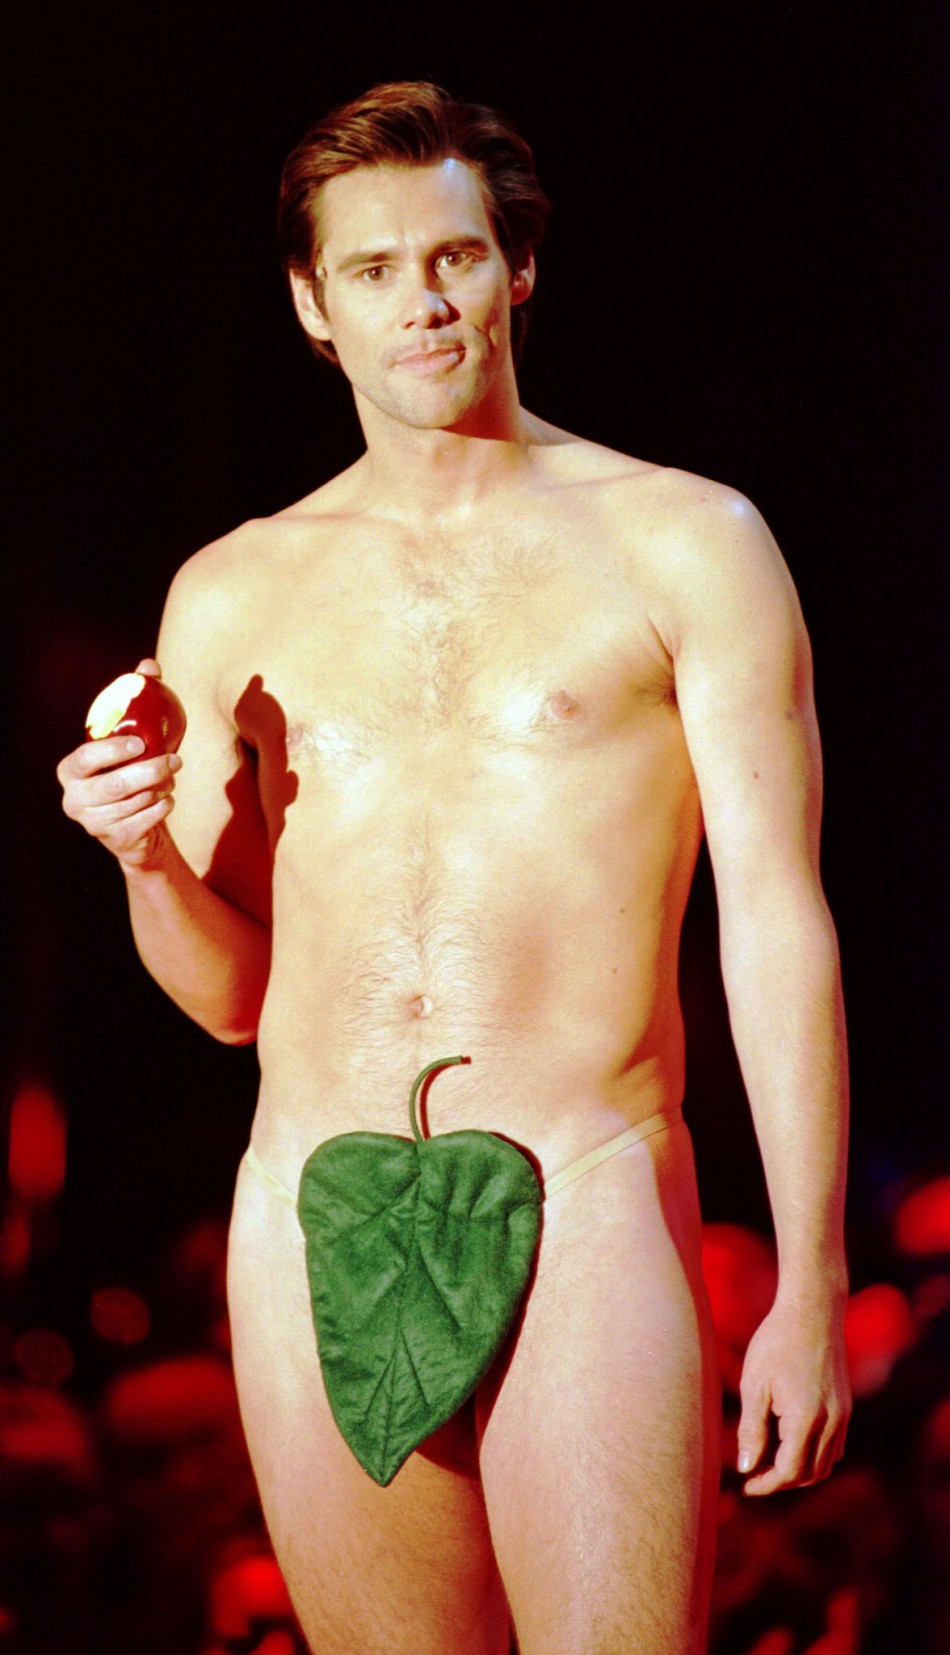 Jim Carrey wore a fig leaf to introduce The Rolling Stones at the VH1 Fashion Awards in New York City in 1997